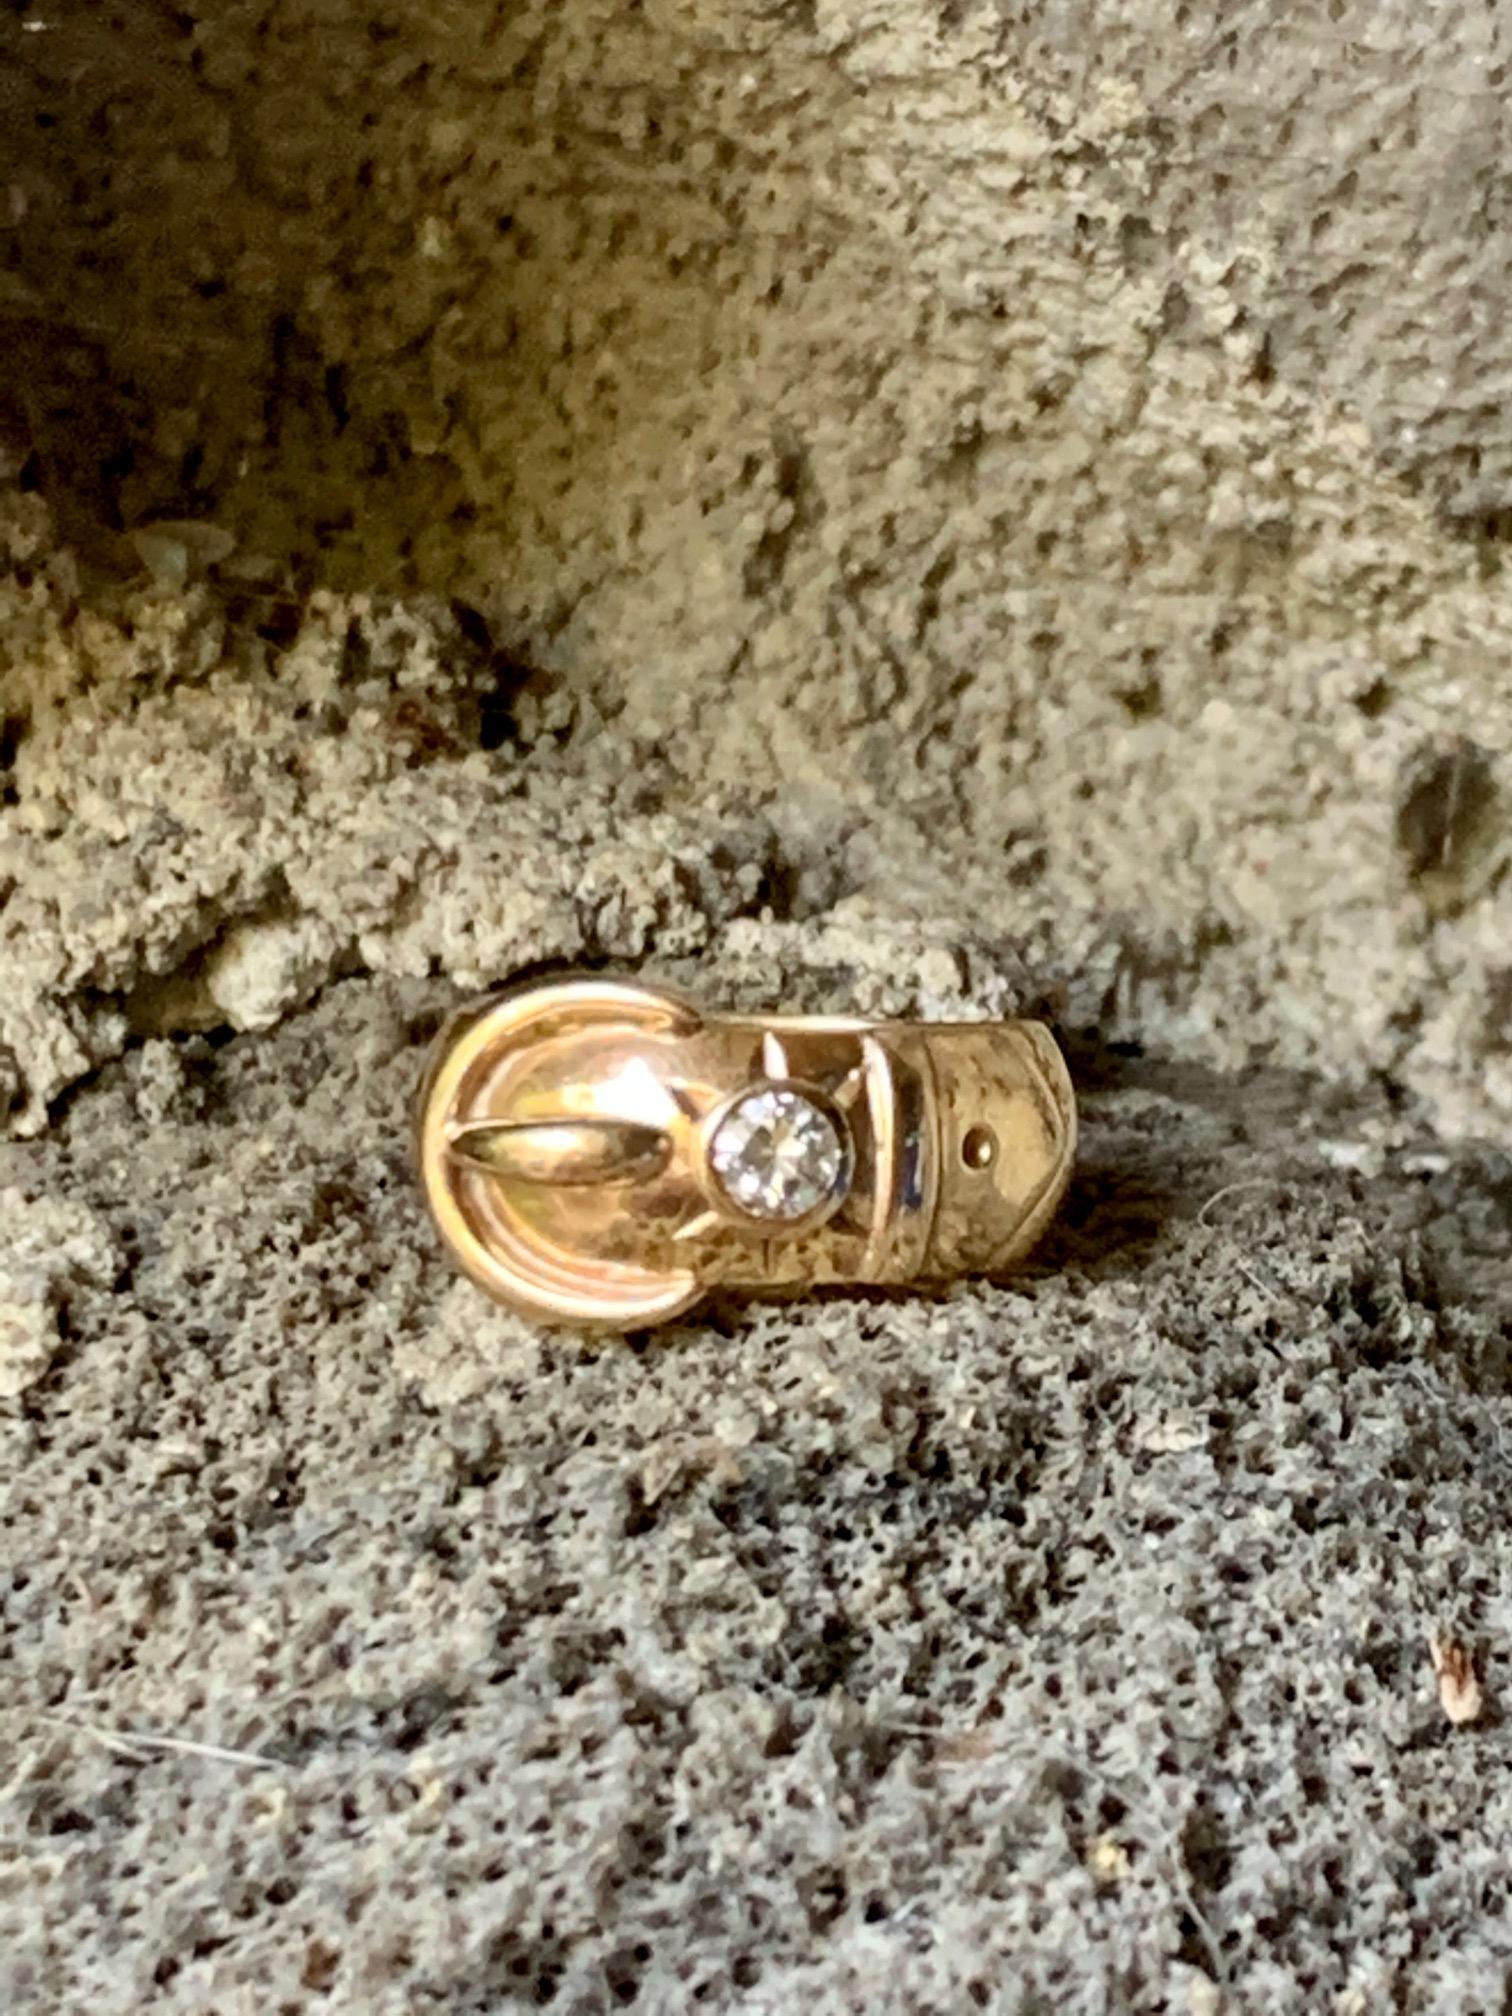 This buckle ring features a 20 point Diamond with color of G/H and clarity of VS(2).  The band measures 7.5mm wide.

Size 7 1/2
Weight: 8.0 grams